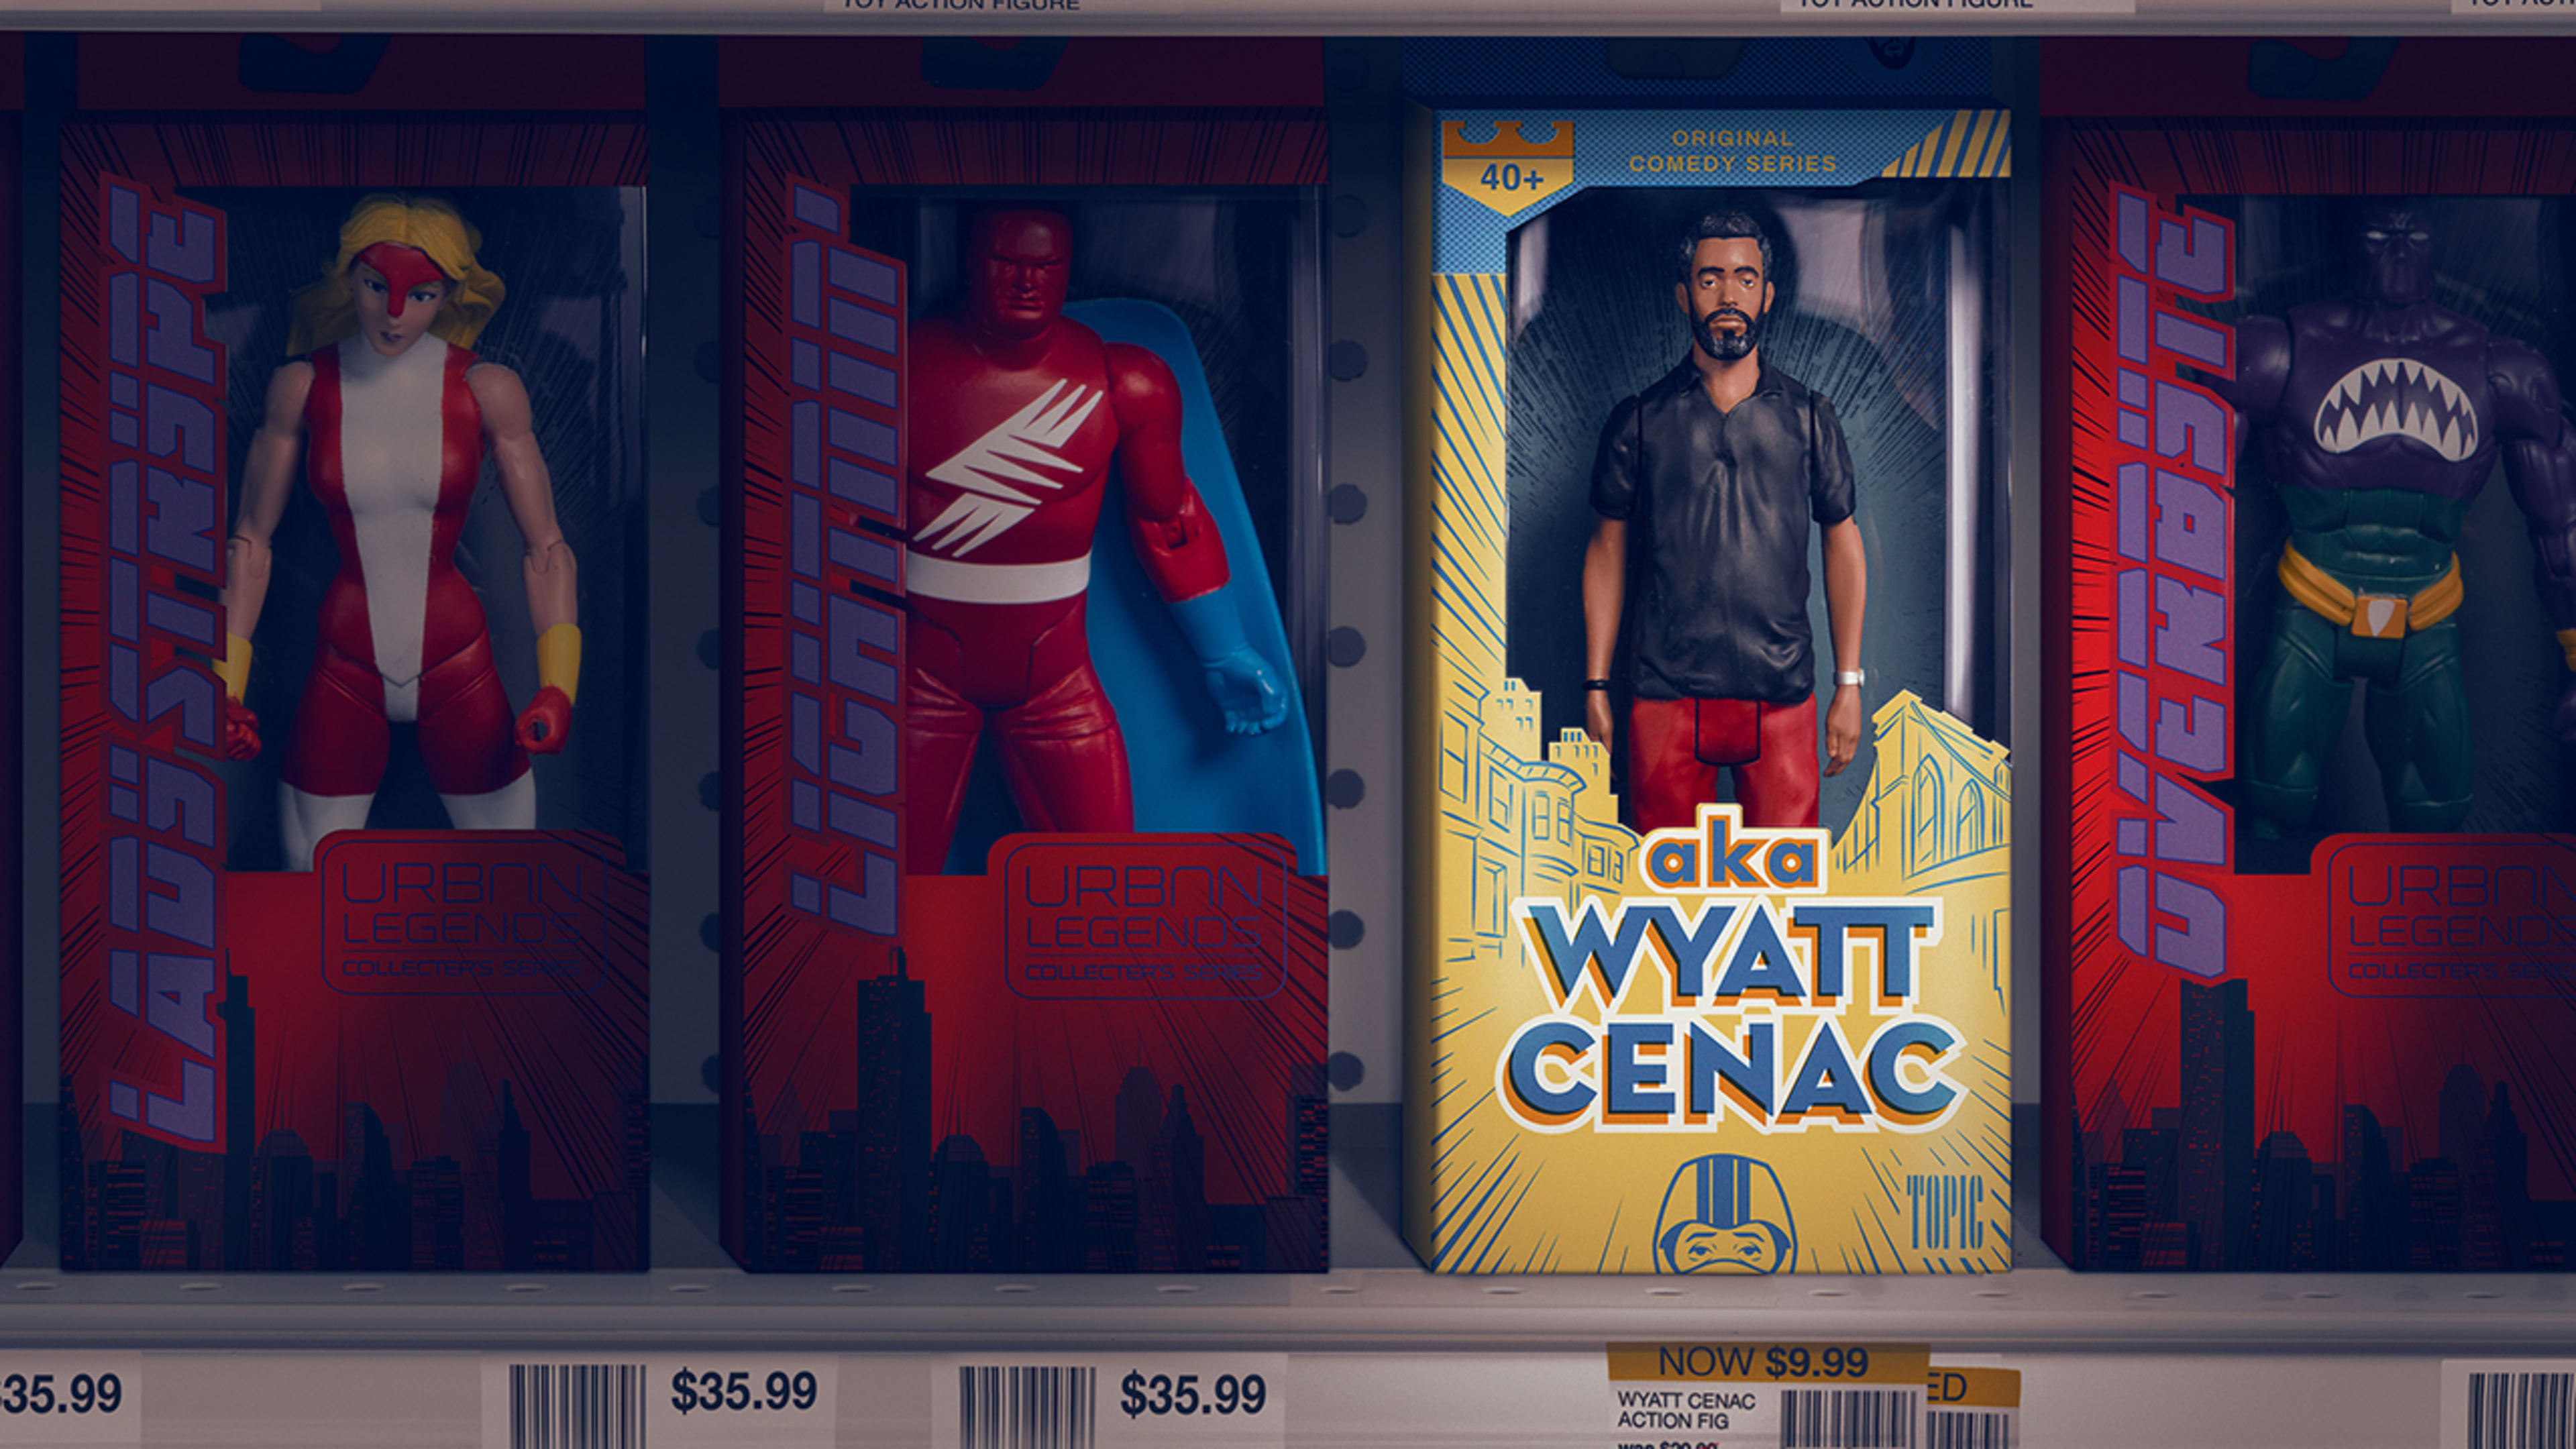 Wyatt Cenac Is Using A Superhero Alter-Ego To Talk About His Real Life